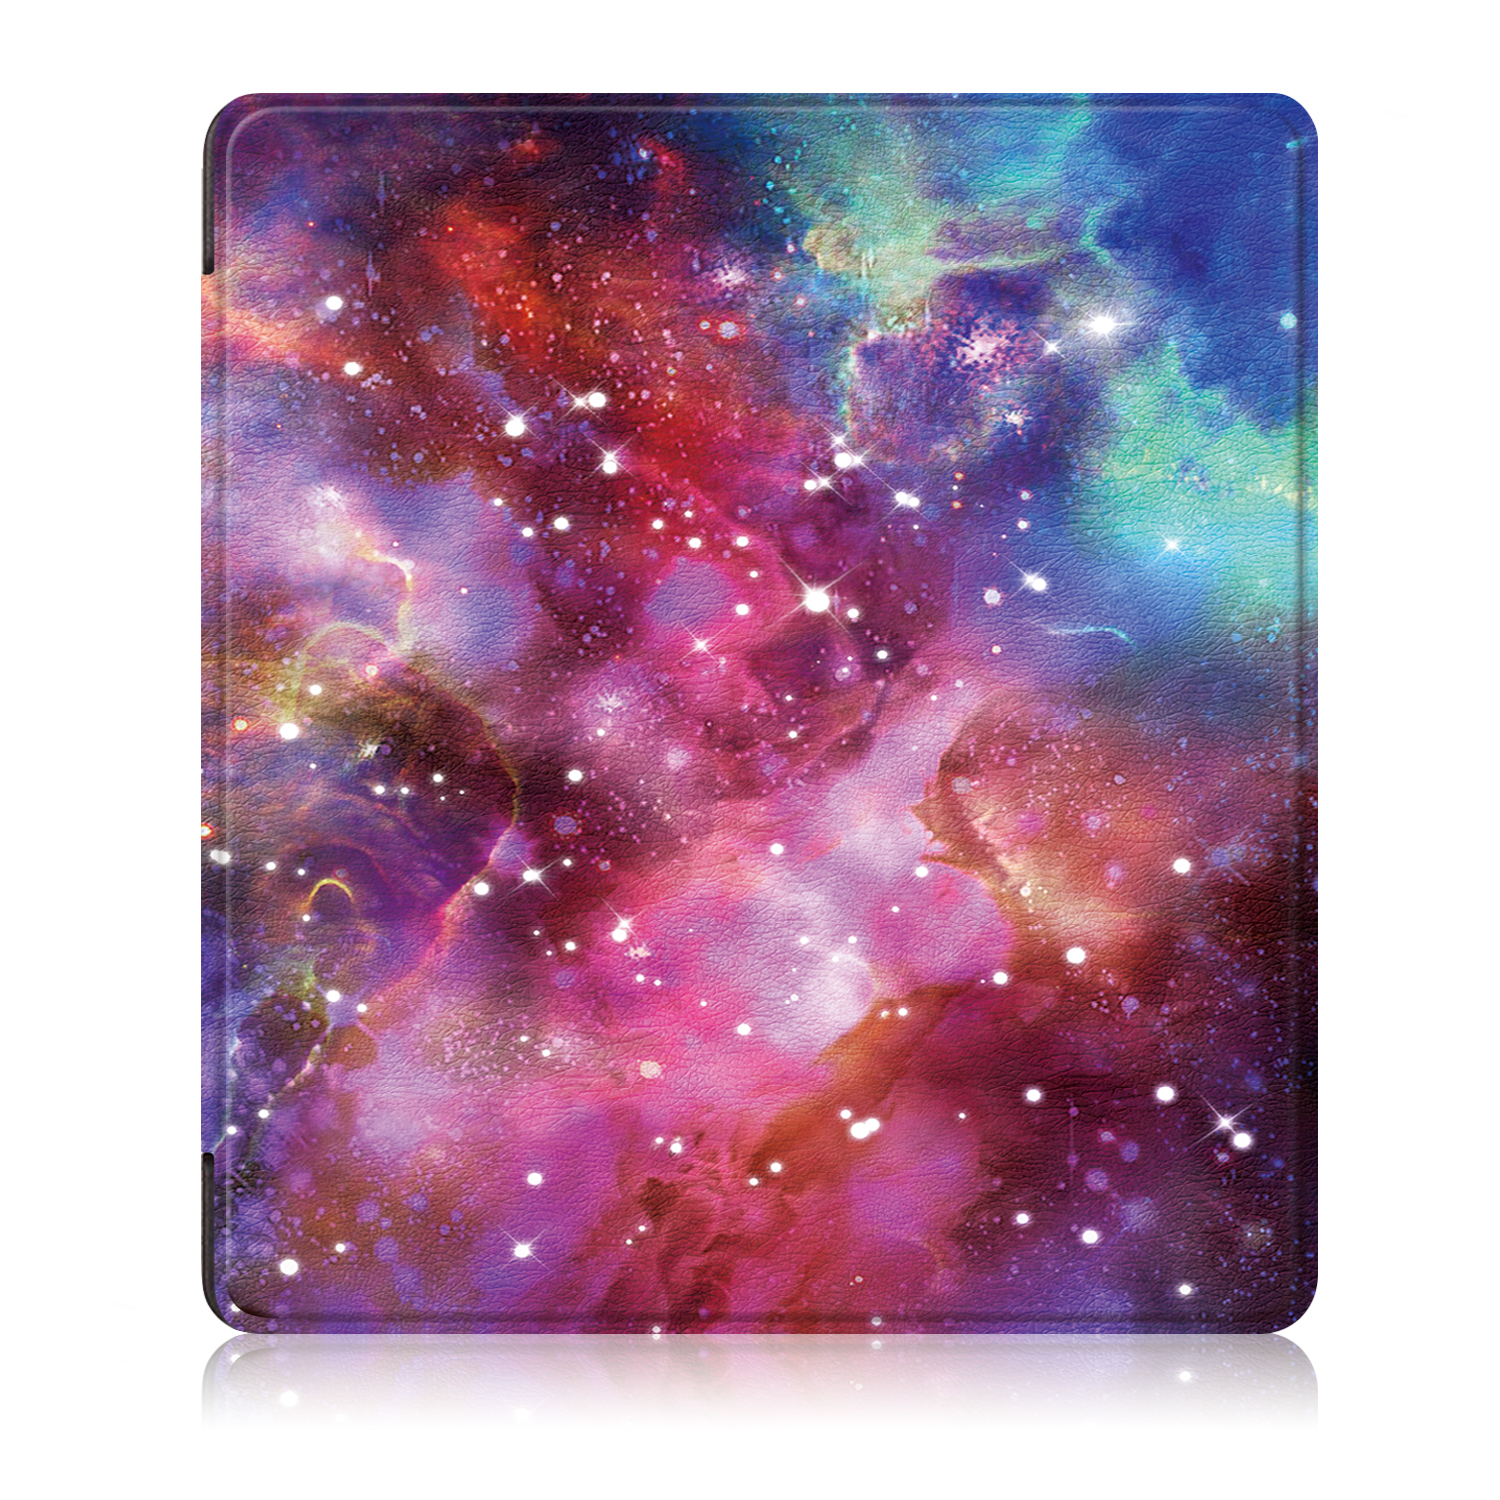 

Printing Tablet Case Cover for Kindle oasis 2019 - Milky Way